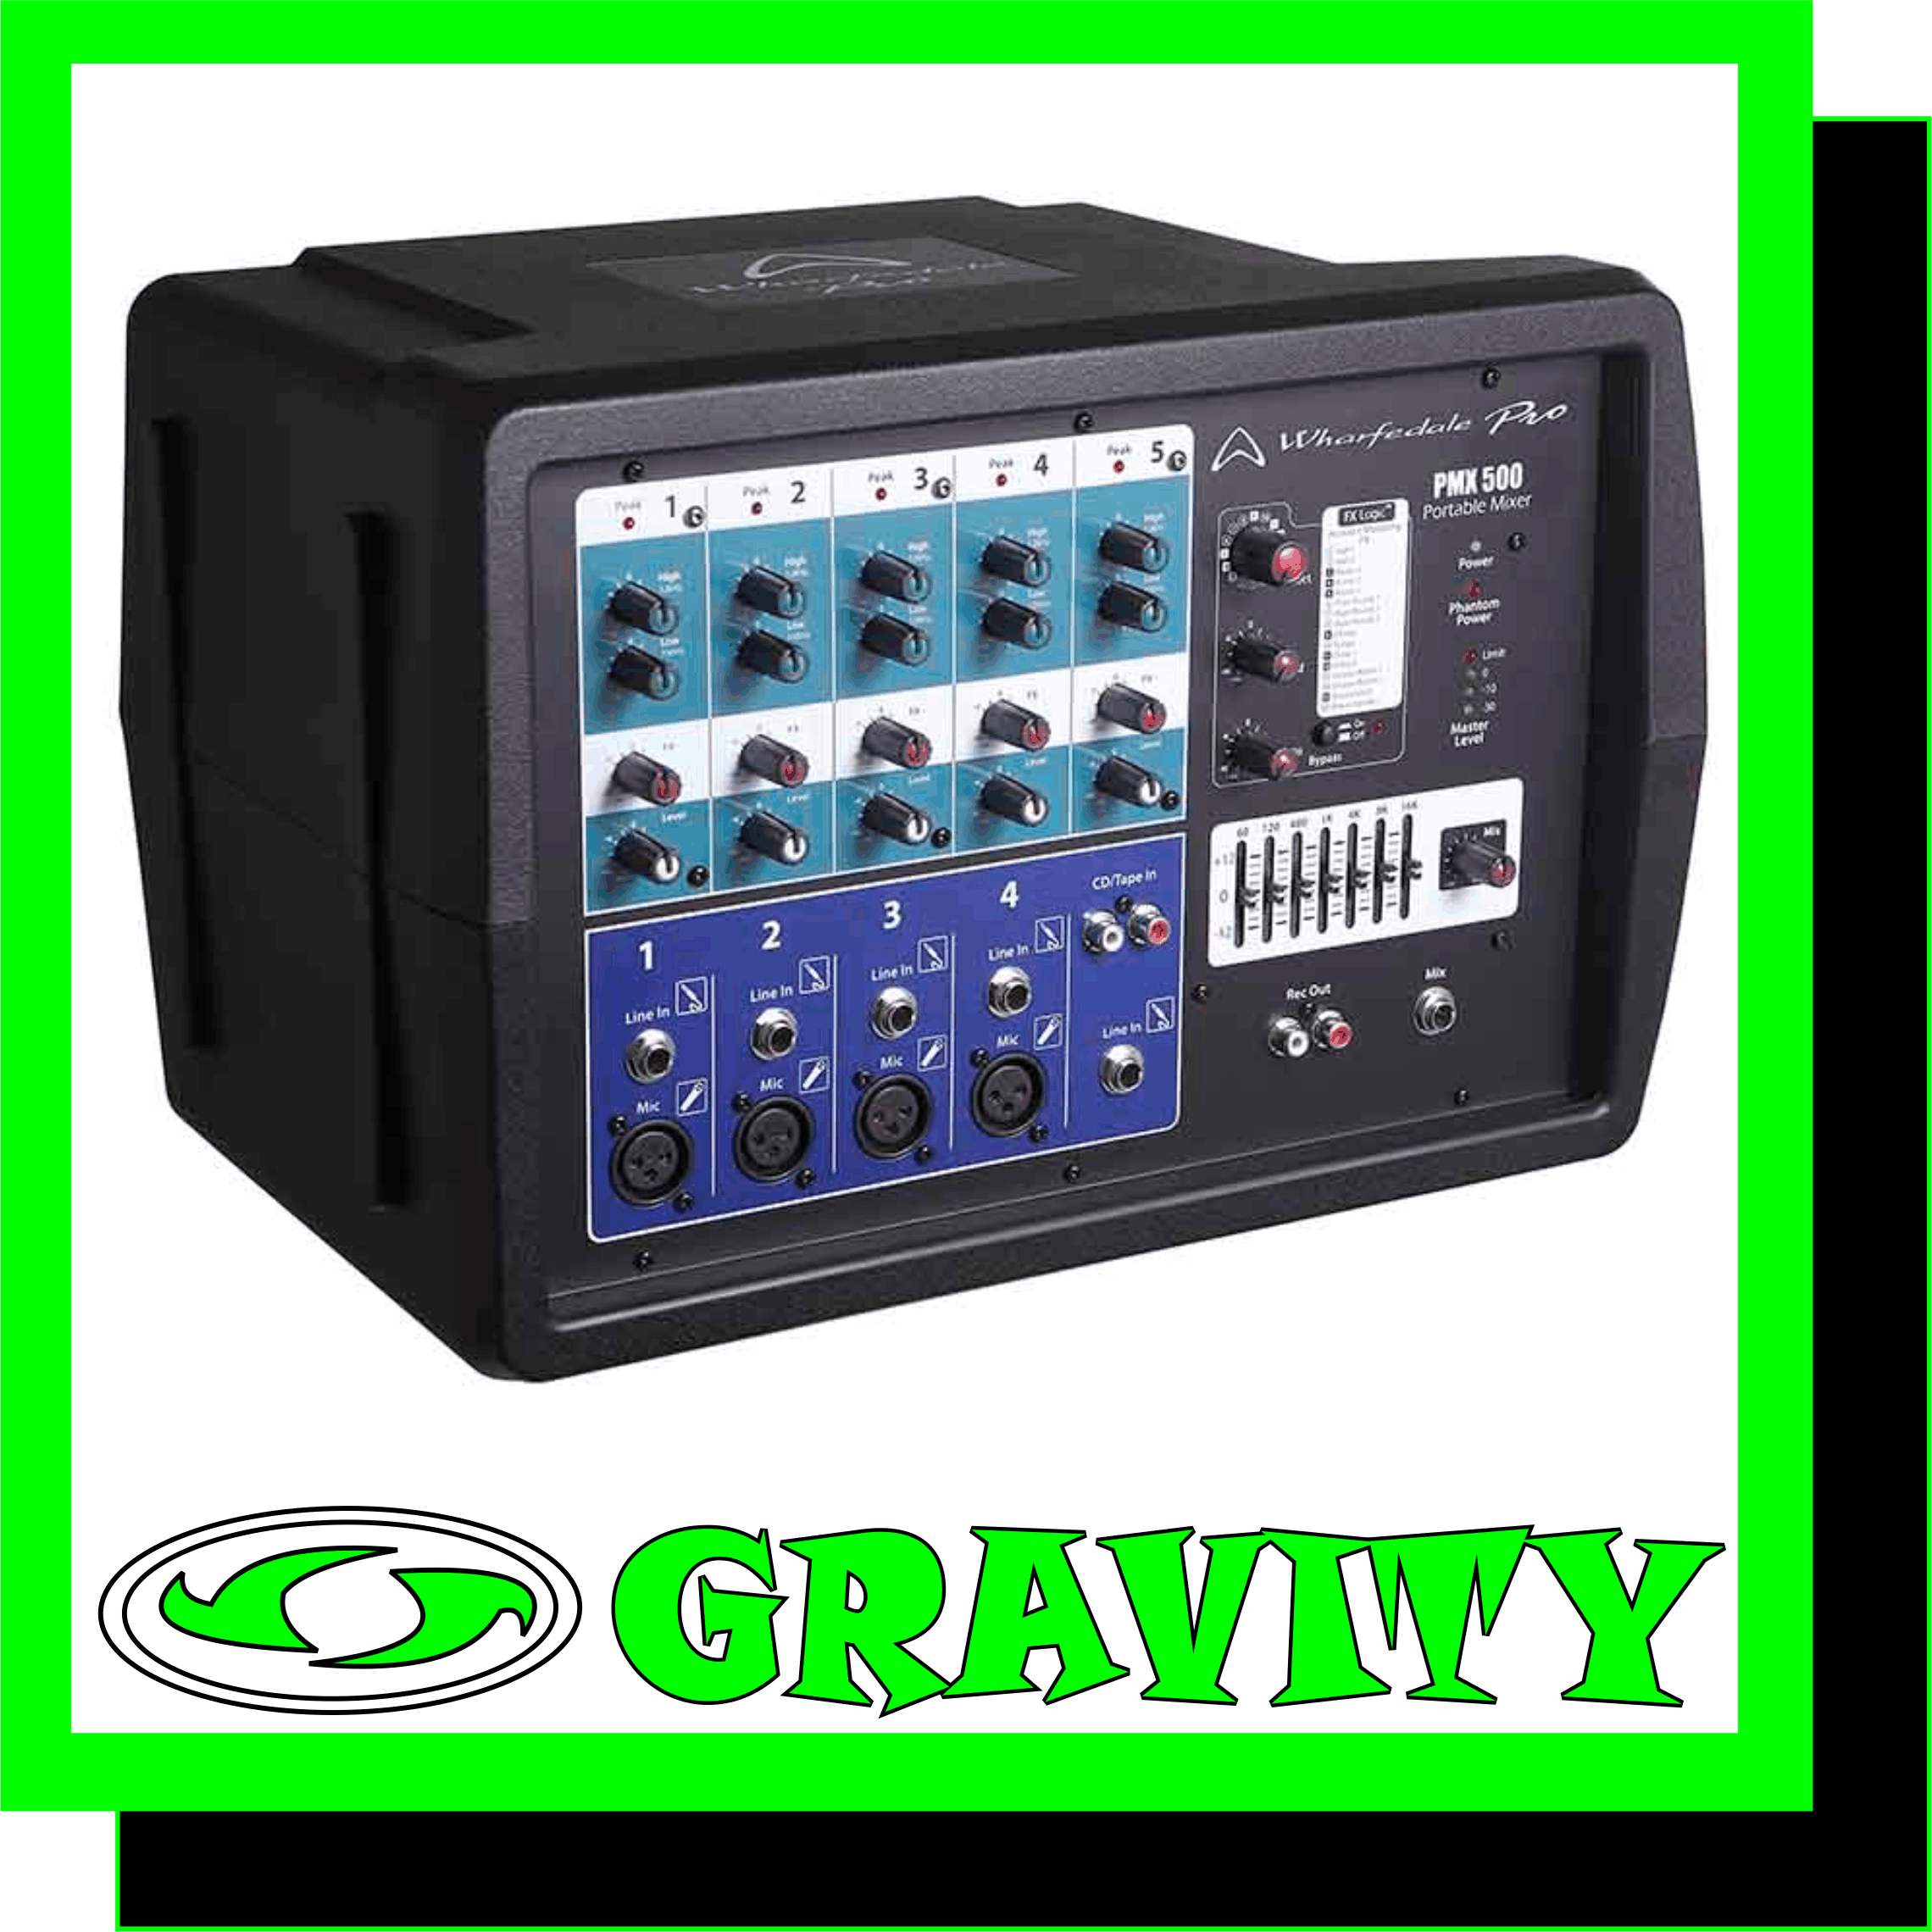 PMX 500  Key Features  -1 x 150W RMS -Lightweight Class-D Amplifier Modules -Lightweight, High-Efficiency Switch-Mode Power Supplies -Phantom Powered Balanced XLR Mic Inputs -¼” Jack and RCA Line Level Inputs -Peak Indicator for Each Channel -2-Band EQ on Every Channel -Built-in Digital FX -Clip LED display -7-Band Graphic EQ on Master Section -4 Segment LED Metering -Jack / Speakon Outputs  The PMX 500 from Wharfedale Pro is a class-leading lightweight, compact and portable powered mixer. Class D amplification technology means the amplifier is portable yet powerful with built-in digital FX this is a time and space saving powered mixer perfect for the mobile performer.